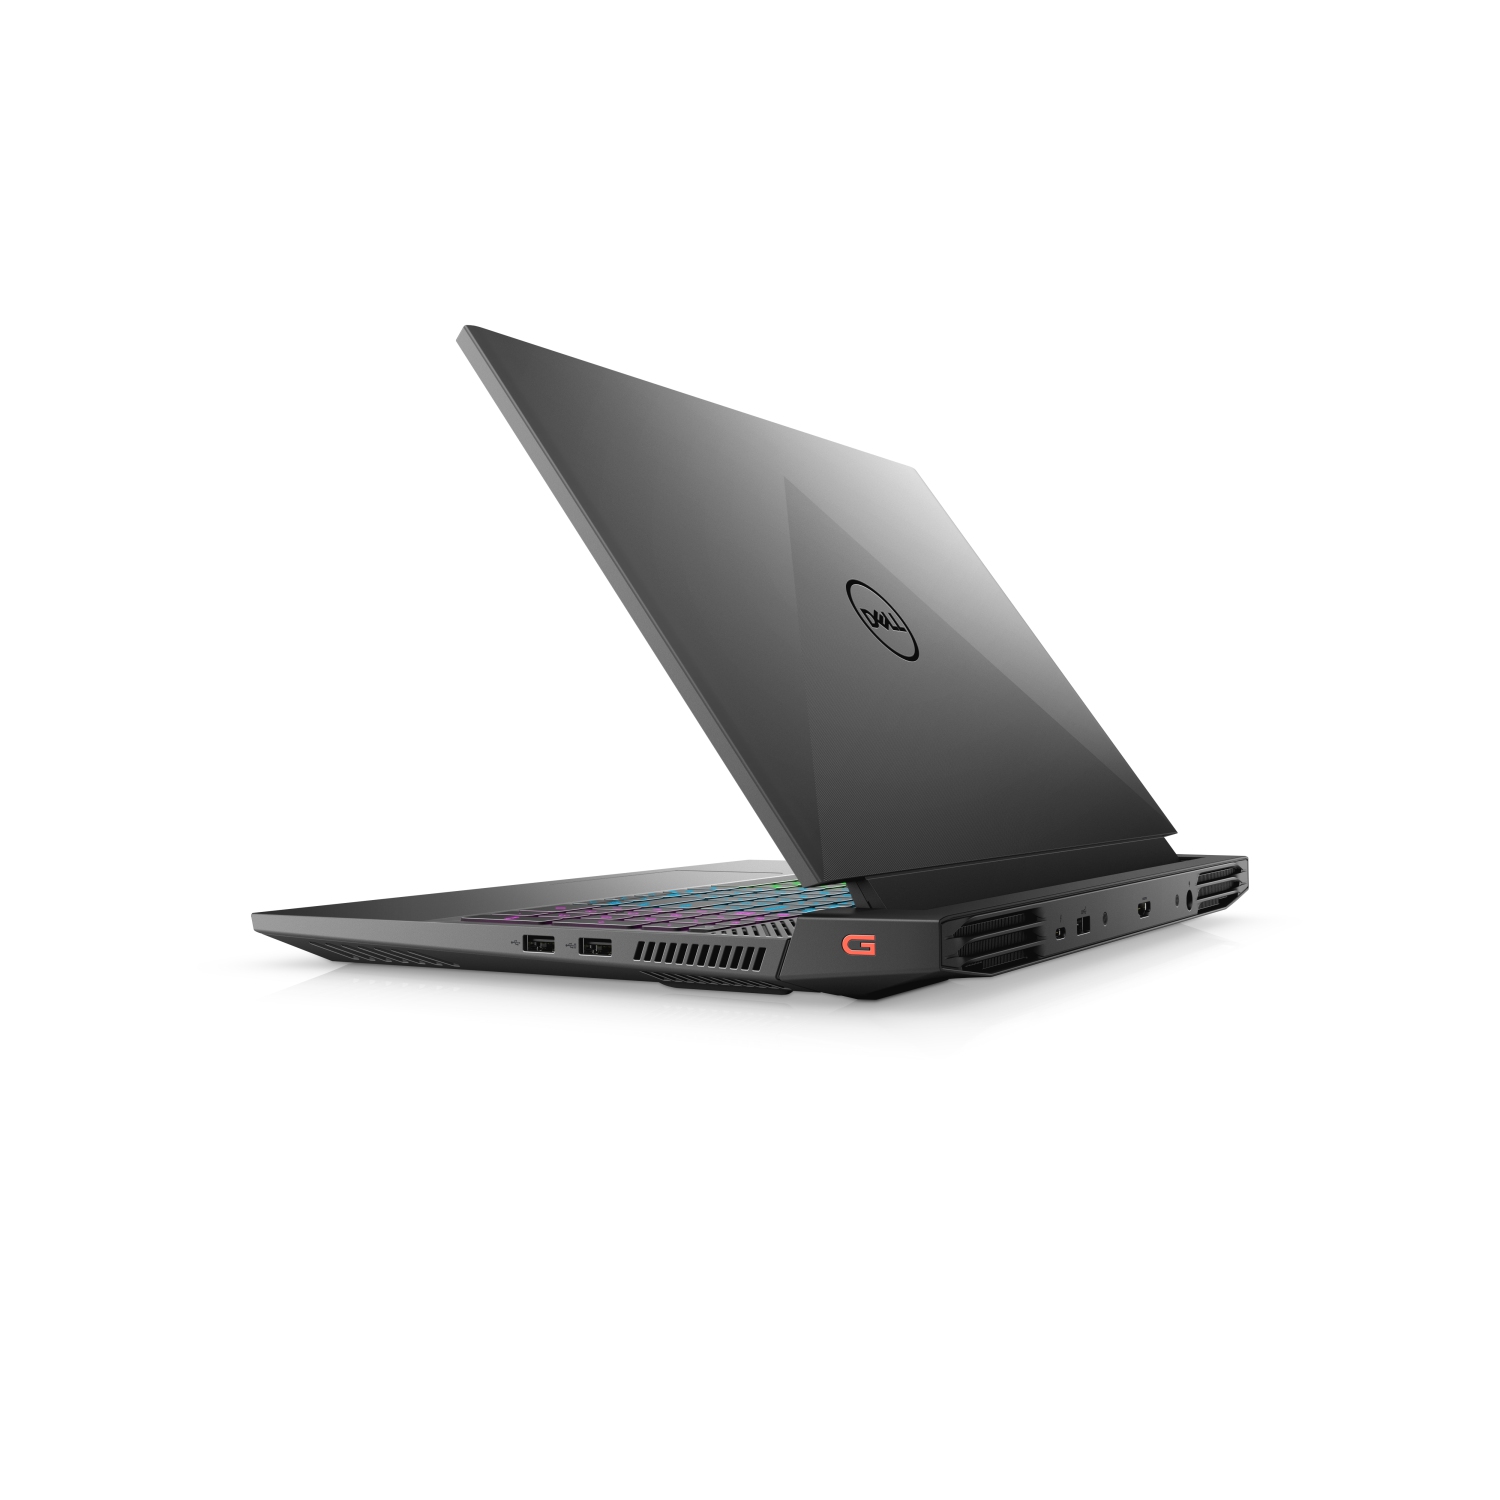 Refurbished (Excellent) - Dell G15 5511 Gaming Laptop (2021), 15.6" FHD, Core i7 - 512GB SSD - 16GB RAM - RTX 3060, 8 Cores @ 4.6 GHz - 11th Gen CPU Certified Refurbished